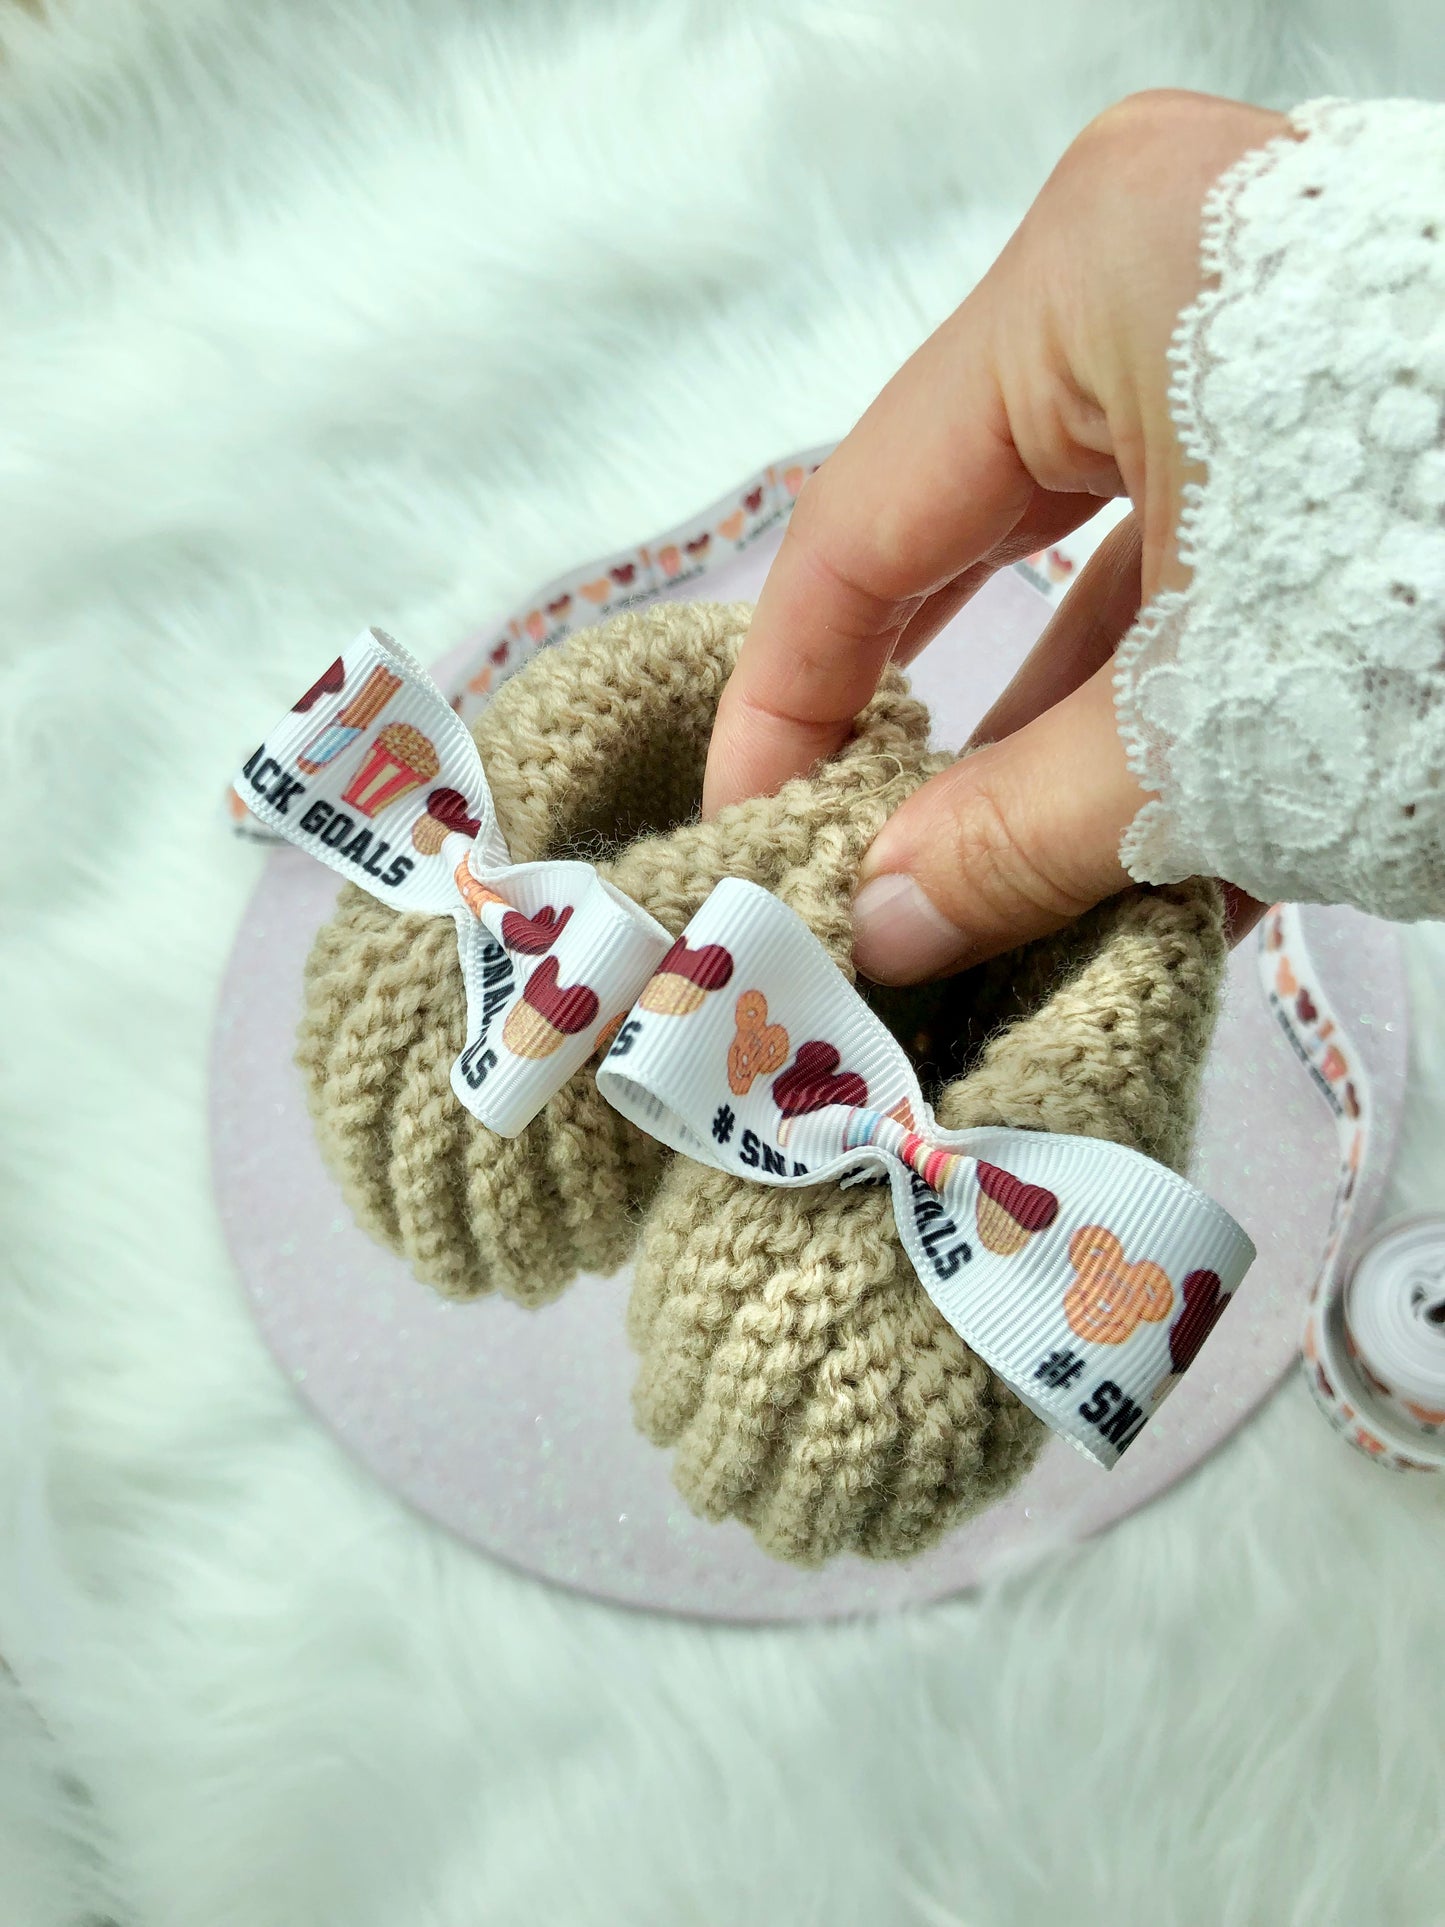 Chaussons au tricot "#snack goals"